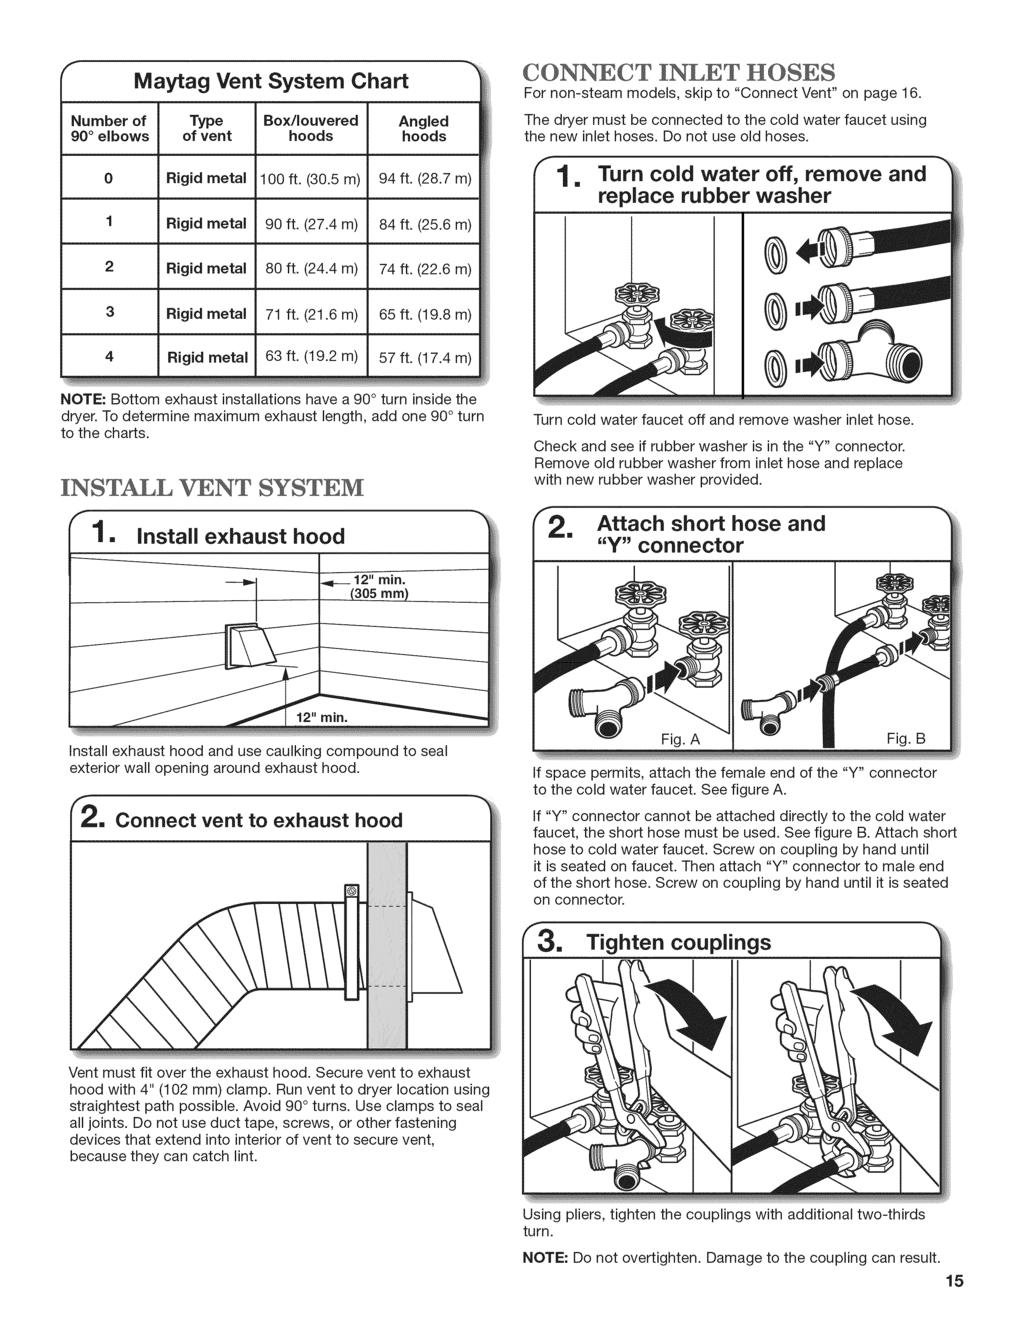 Number of 90 elbows Maytag Vent System Chart Type of vent Box/Iouvered hoods Angled hoods CONNECT INLET HOSES For non-steam models, skip to "Connect Vent" on page 16.